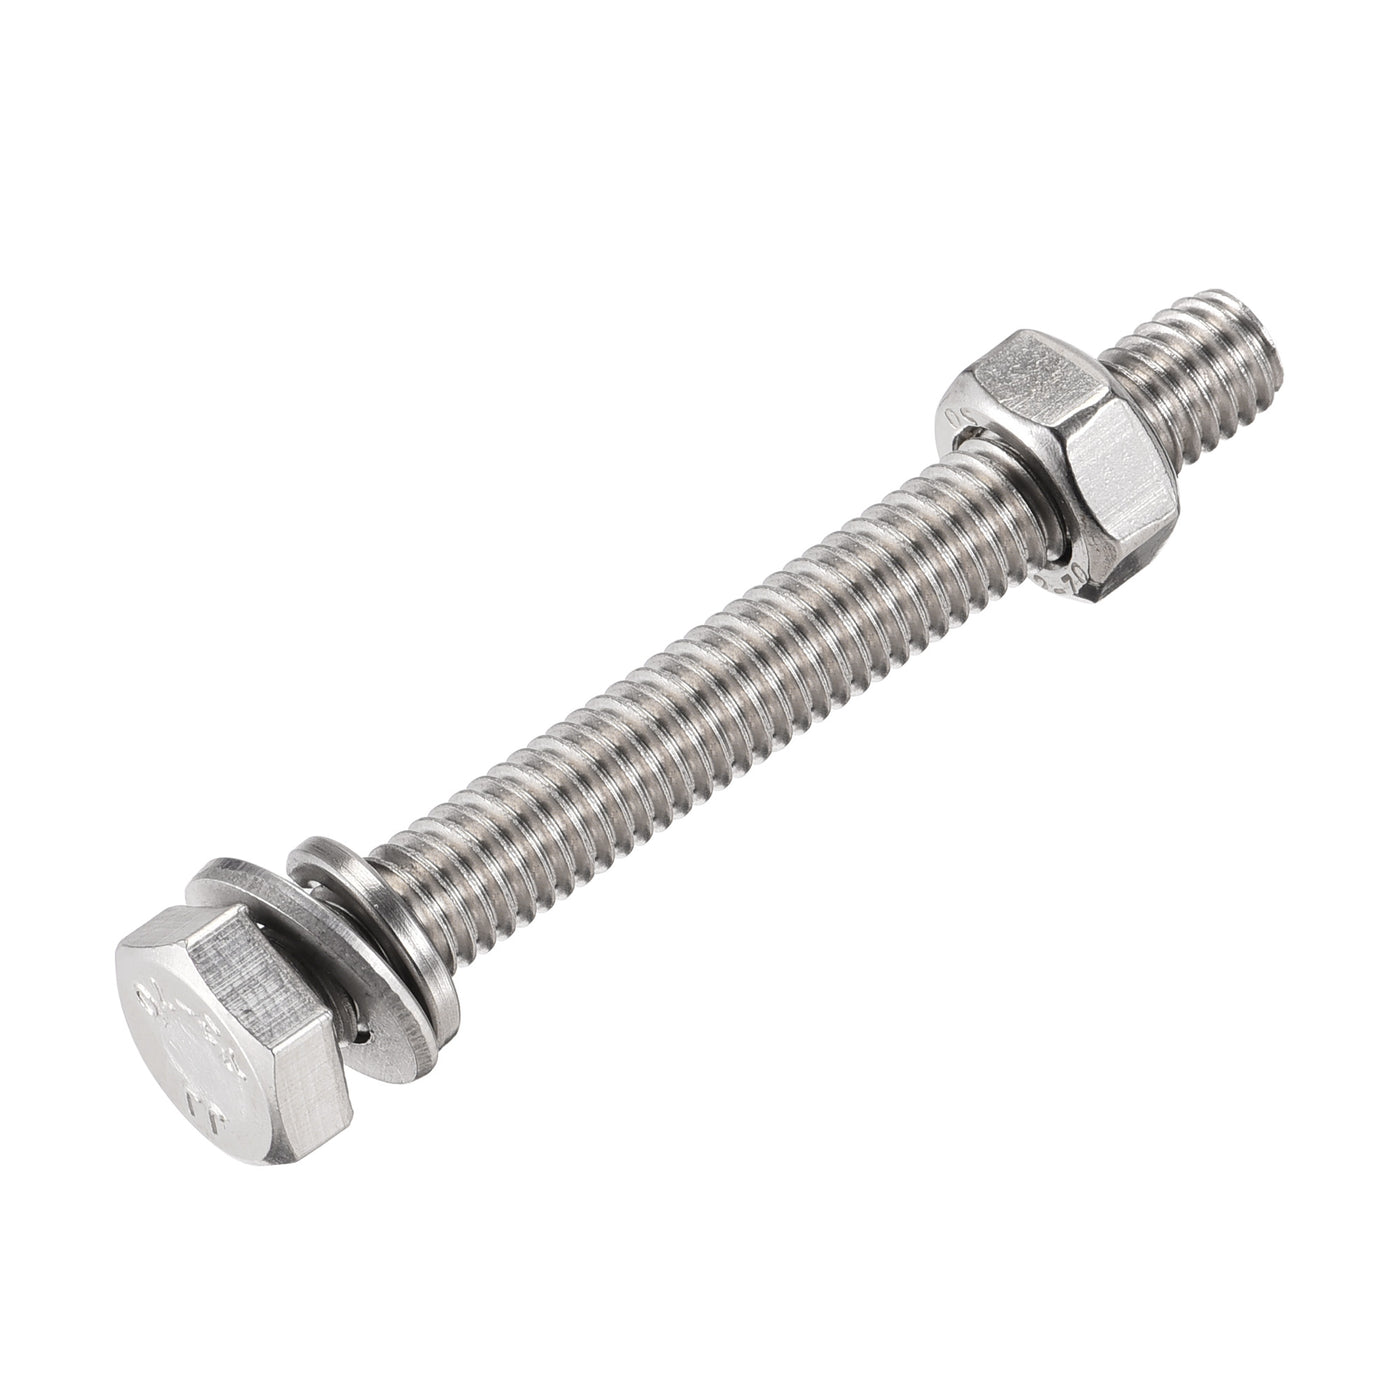 Uxcell Uxcell M6 x 80mm Hex Head Screws Bolts, Nuts, Flat & Lock Washers Kits, 304 Stainless Steel Fully Thread Hexagon Bolts 6 Sets